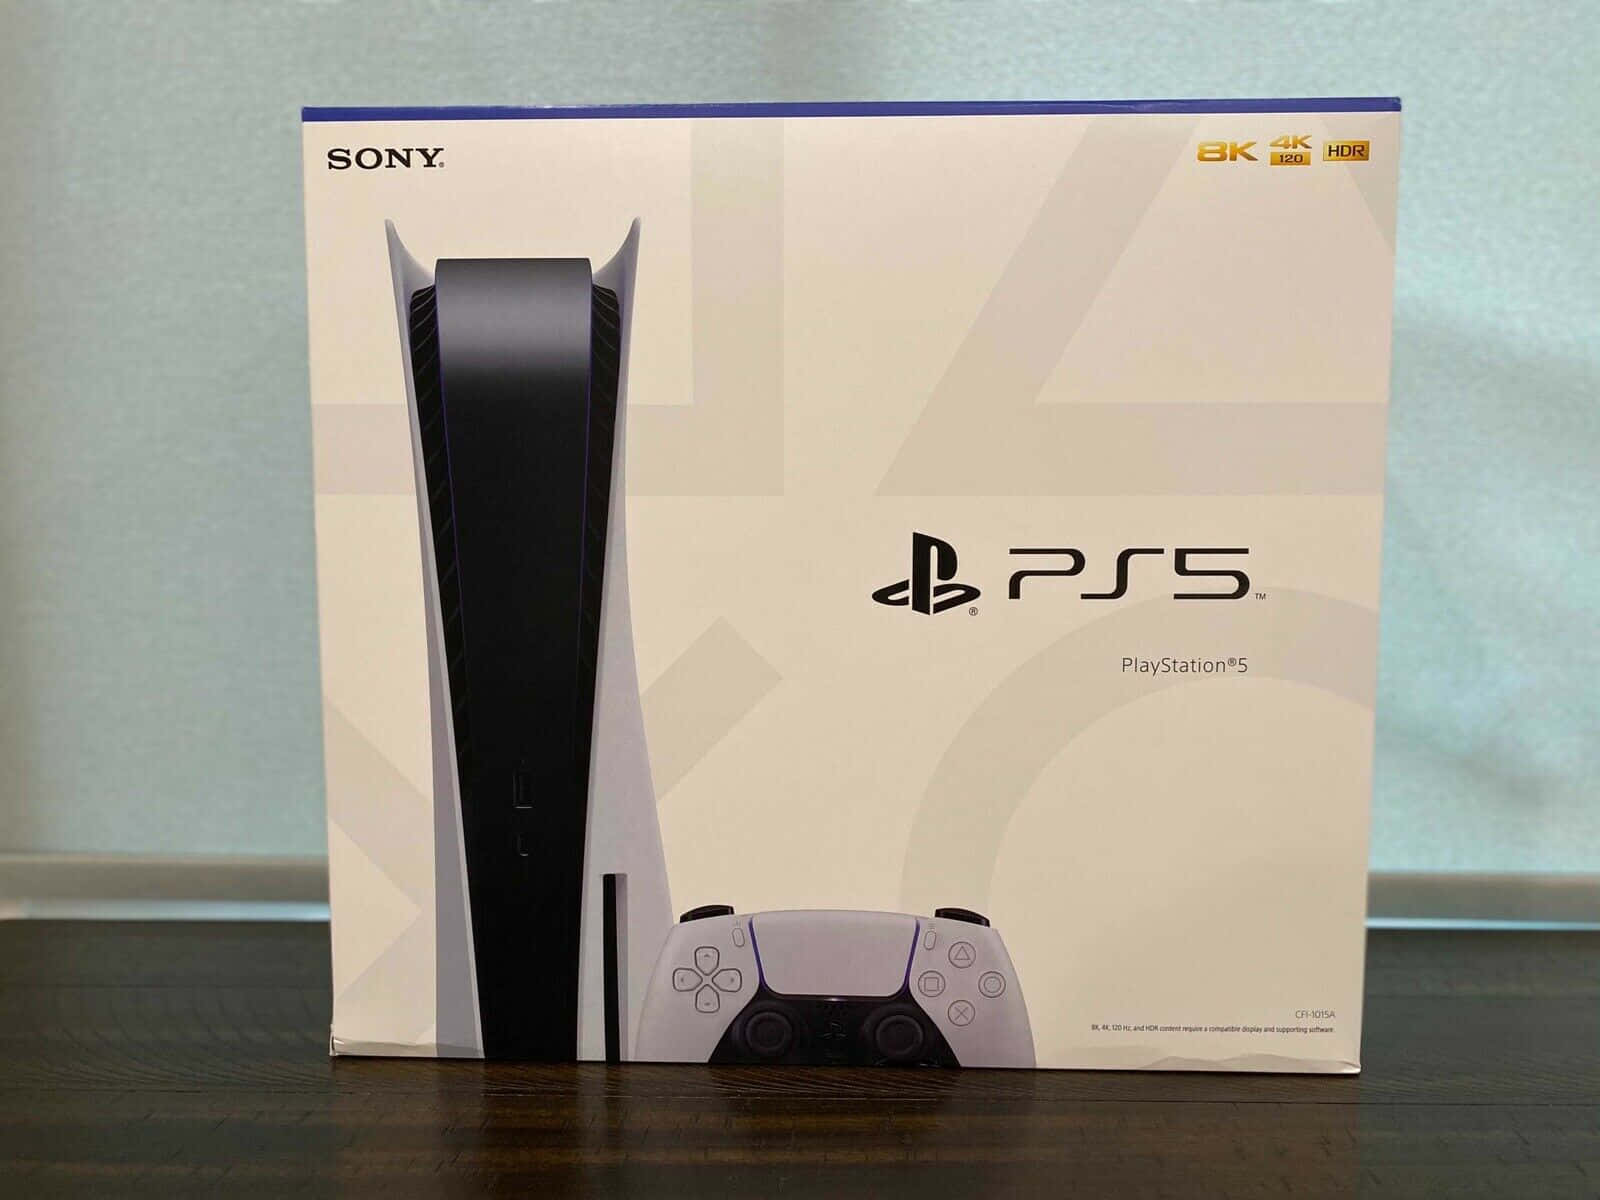 The new Playstation 5 console has arrived!